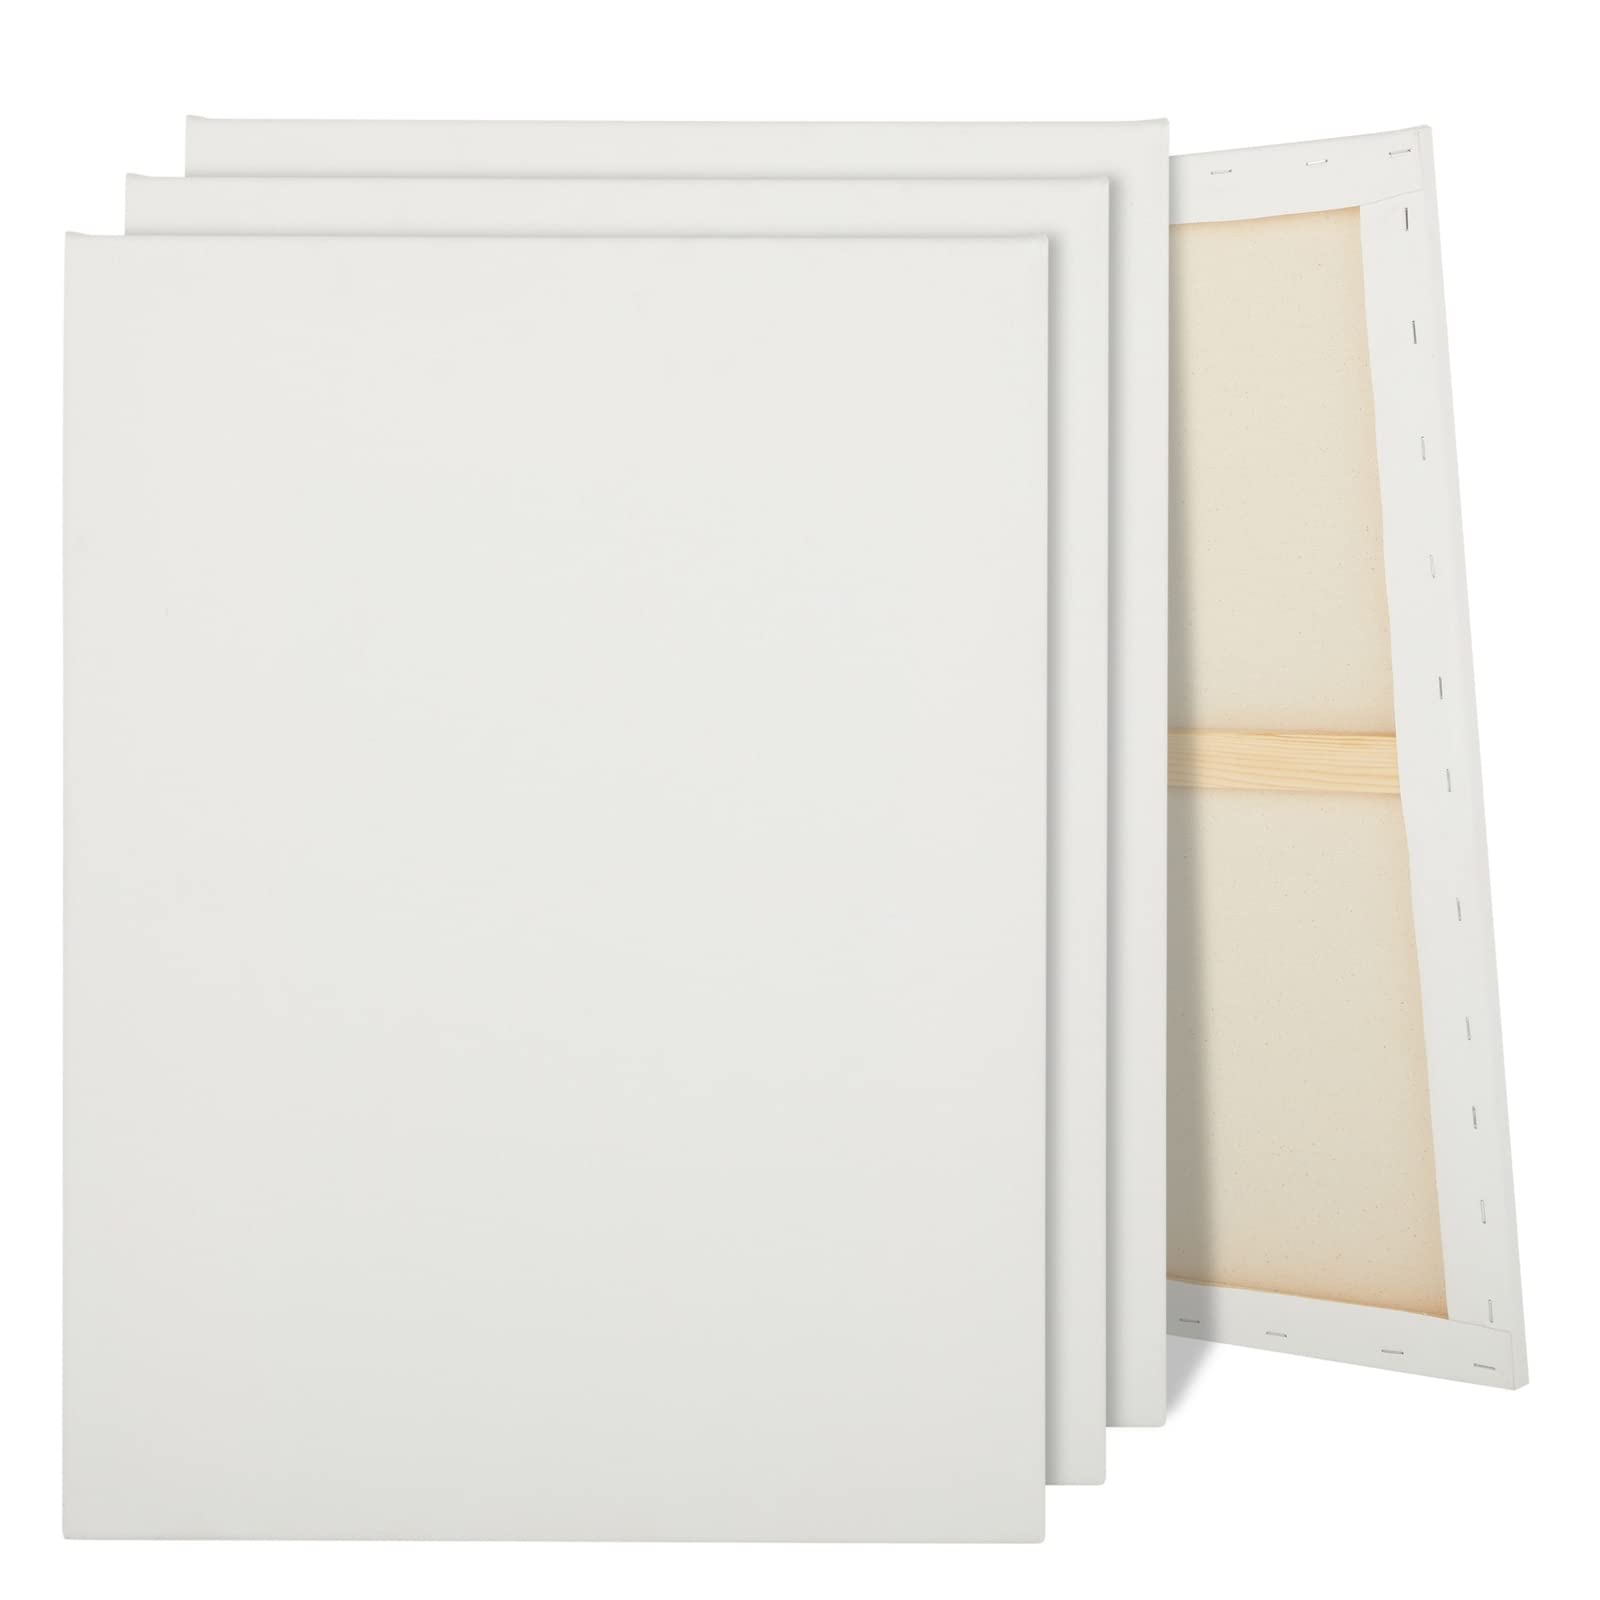 Stretched White Canvas Boards for Painting for Acrylic Oil Paints